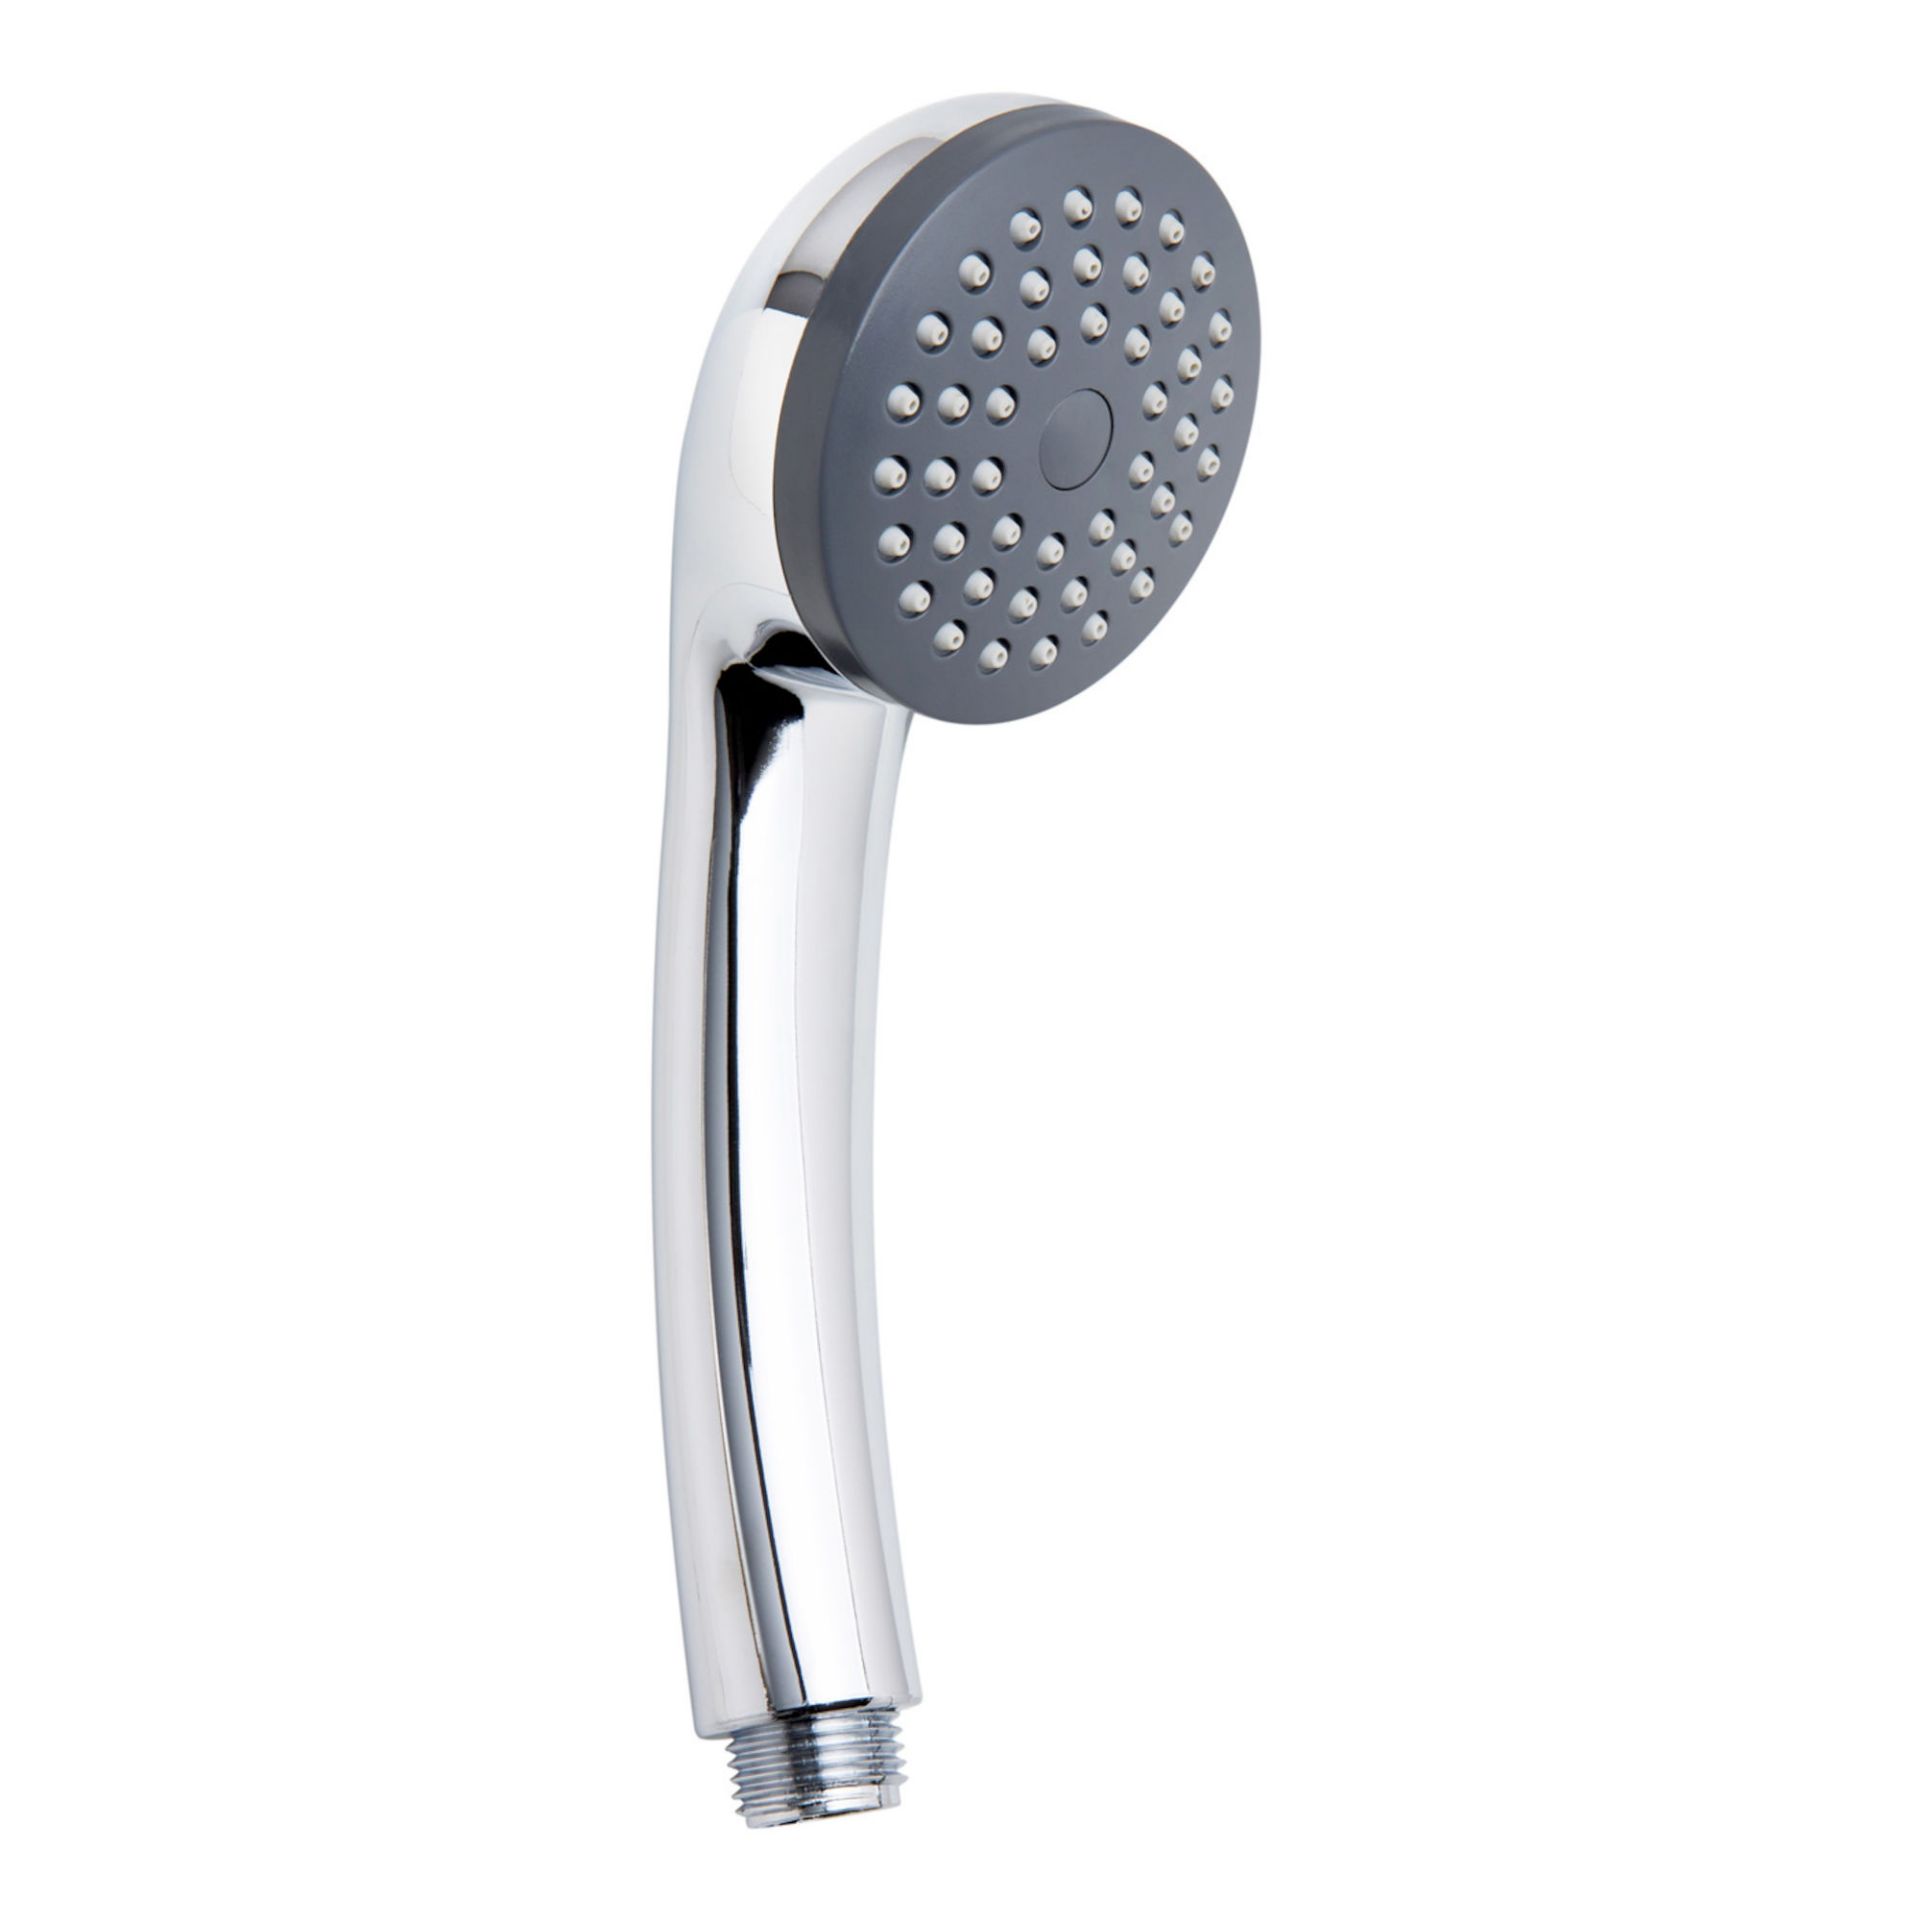 (EE1014) Round Handheld Shower Head Chrome effect handset Easy clean anti-lime scale nozzles ...